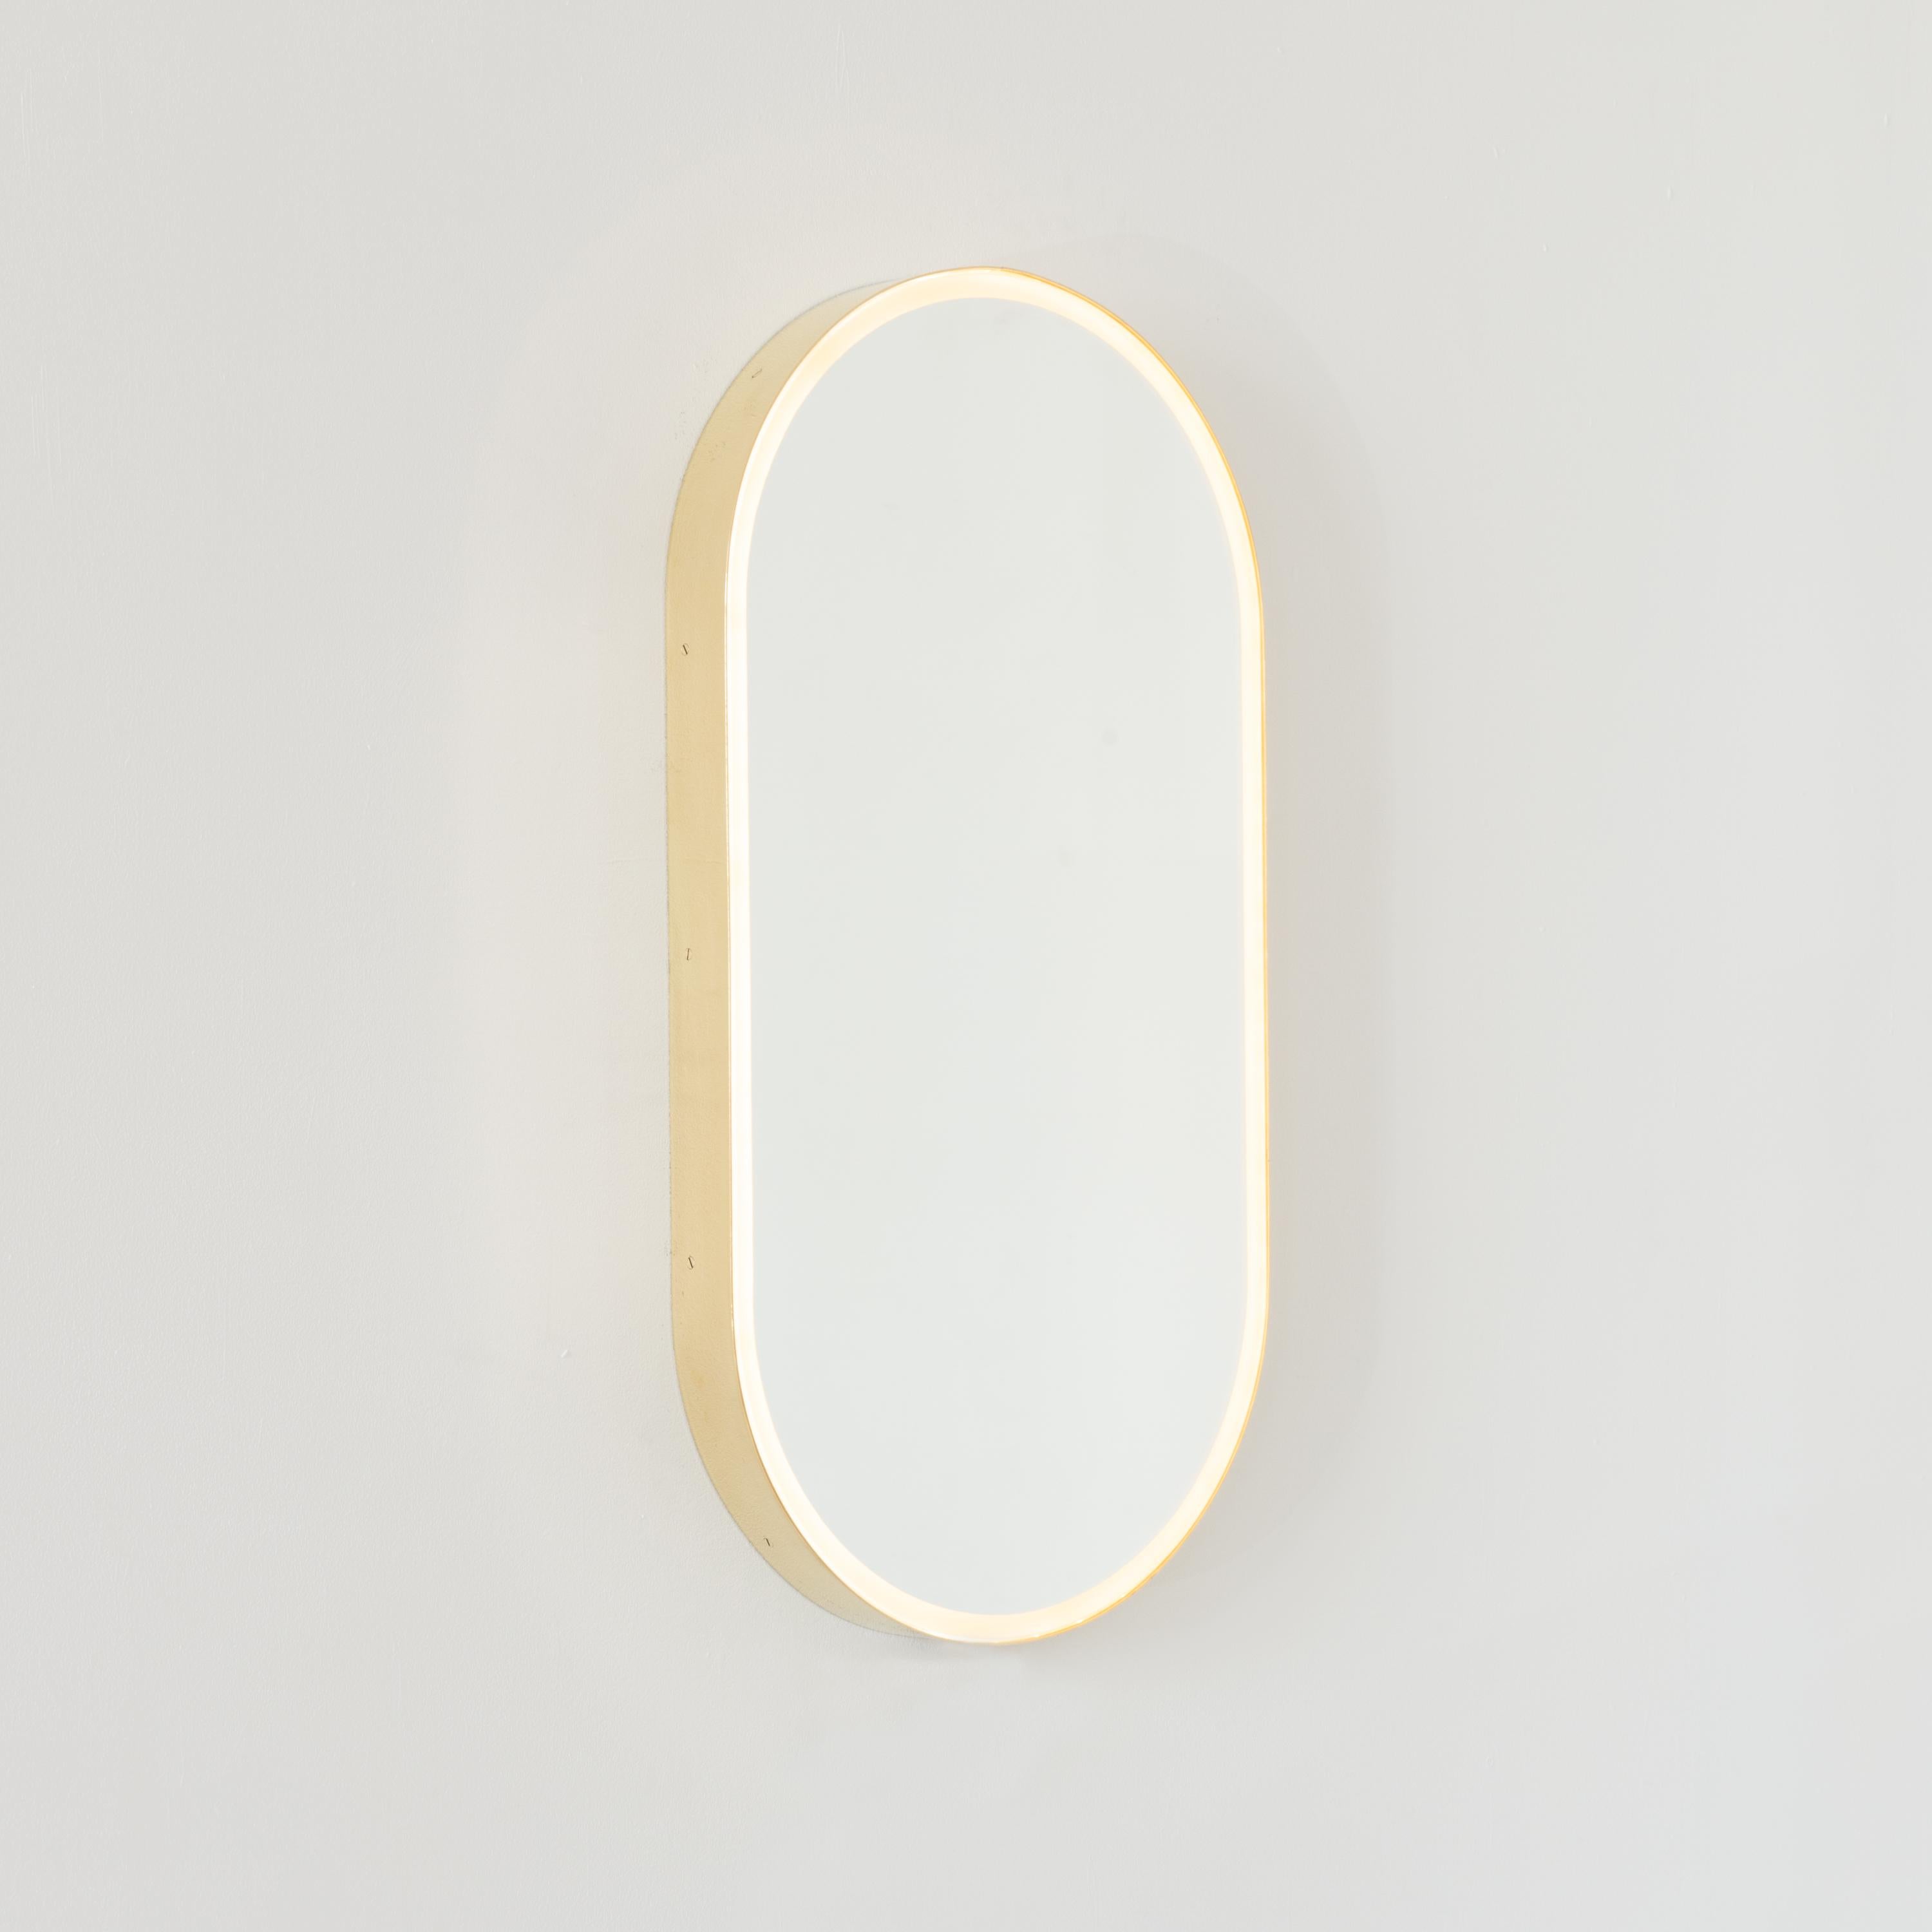 British Capsula Illuminated Customisable Contemporary Mirror with Brass Frame, Small For Sale